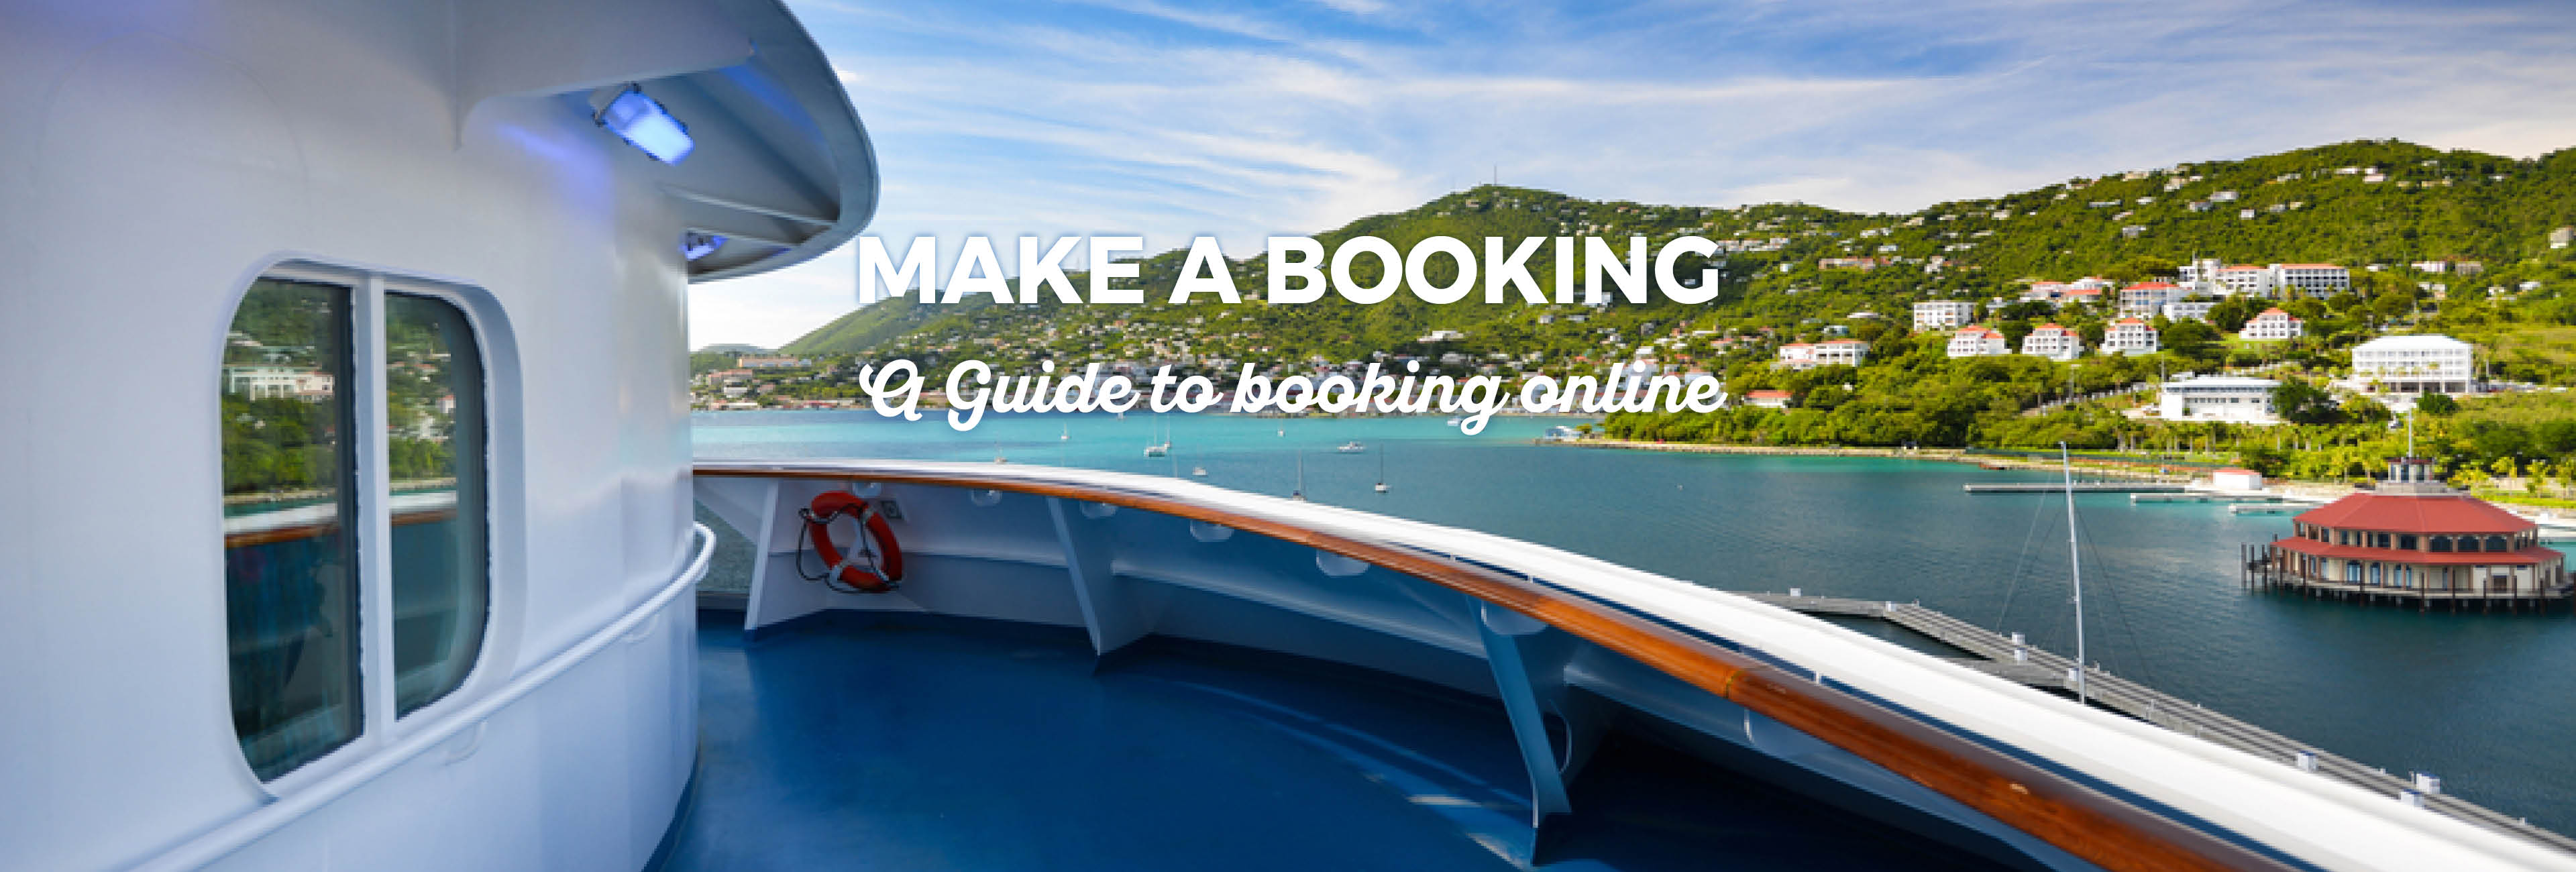 booking a cruise while on a cruise